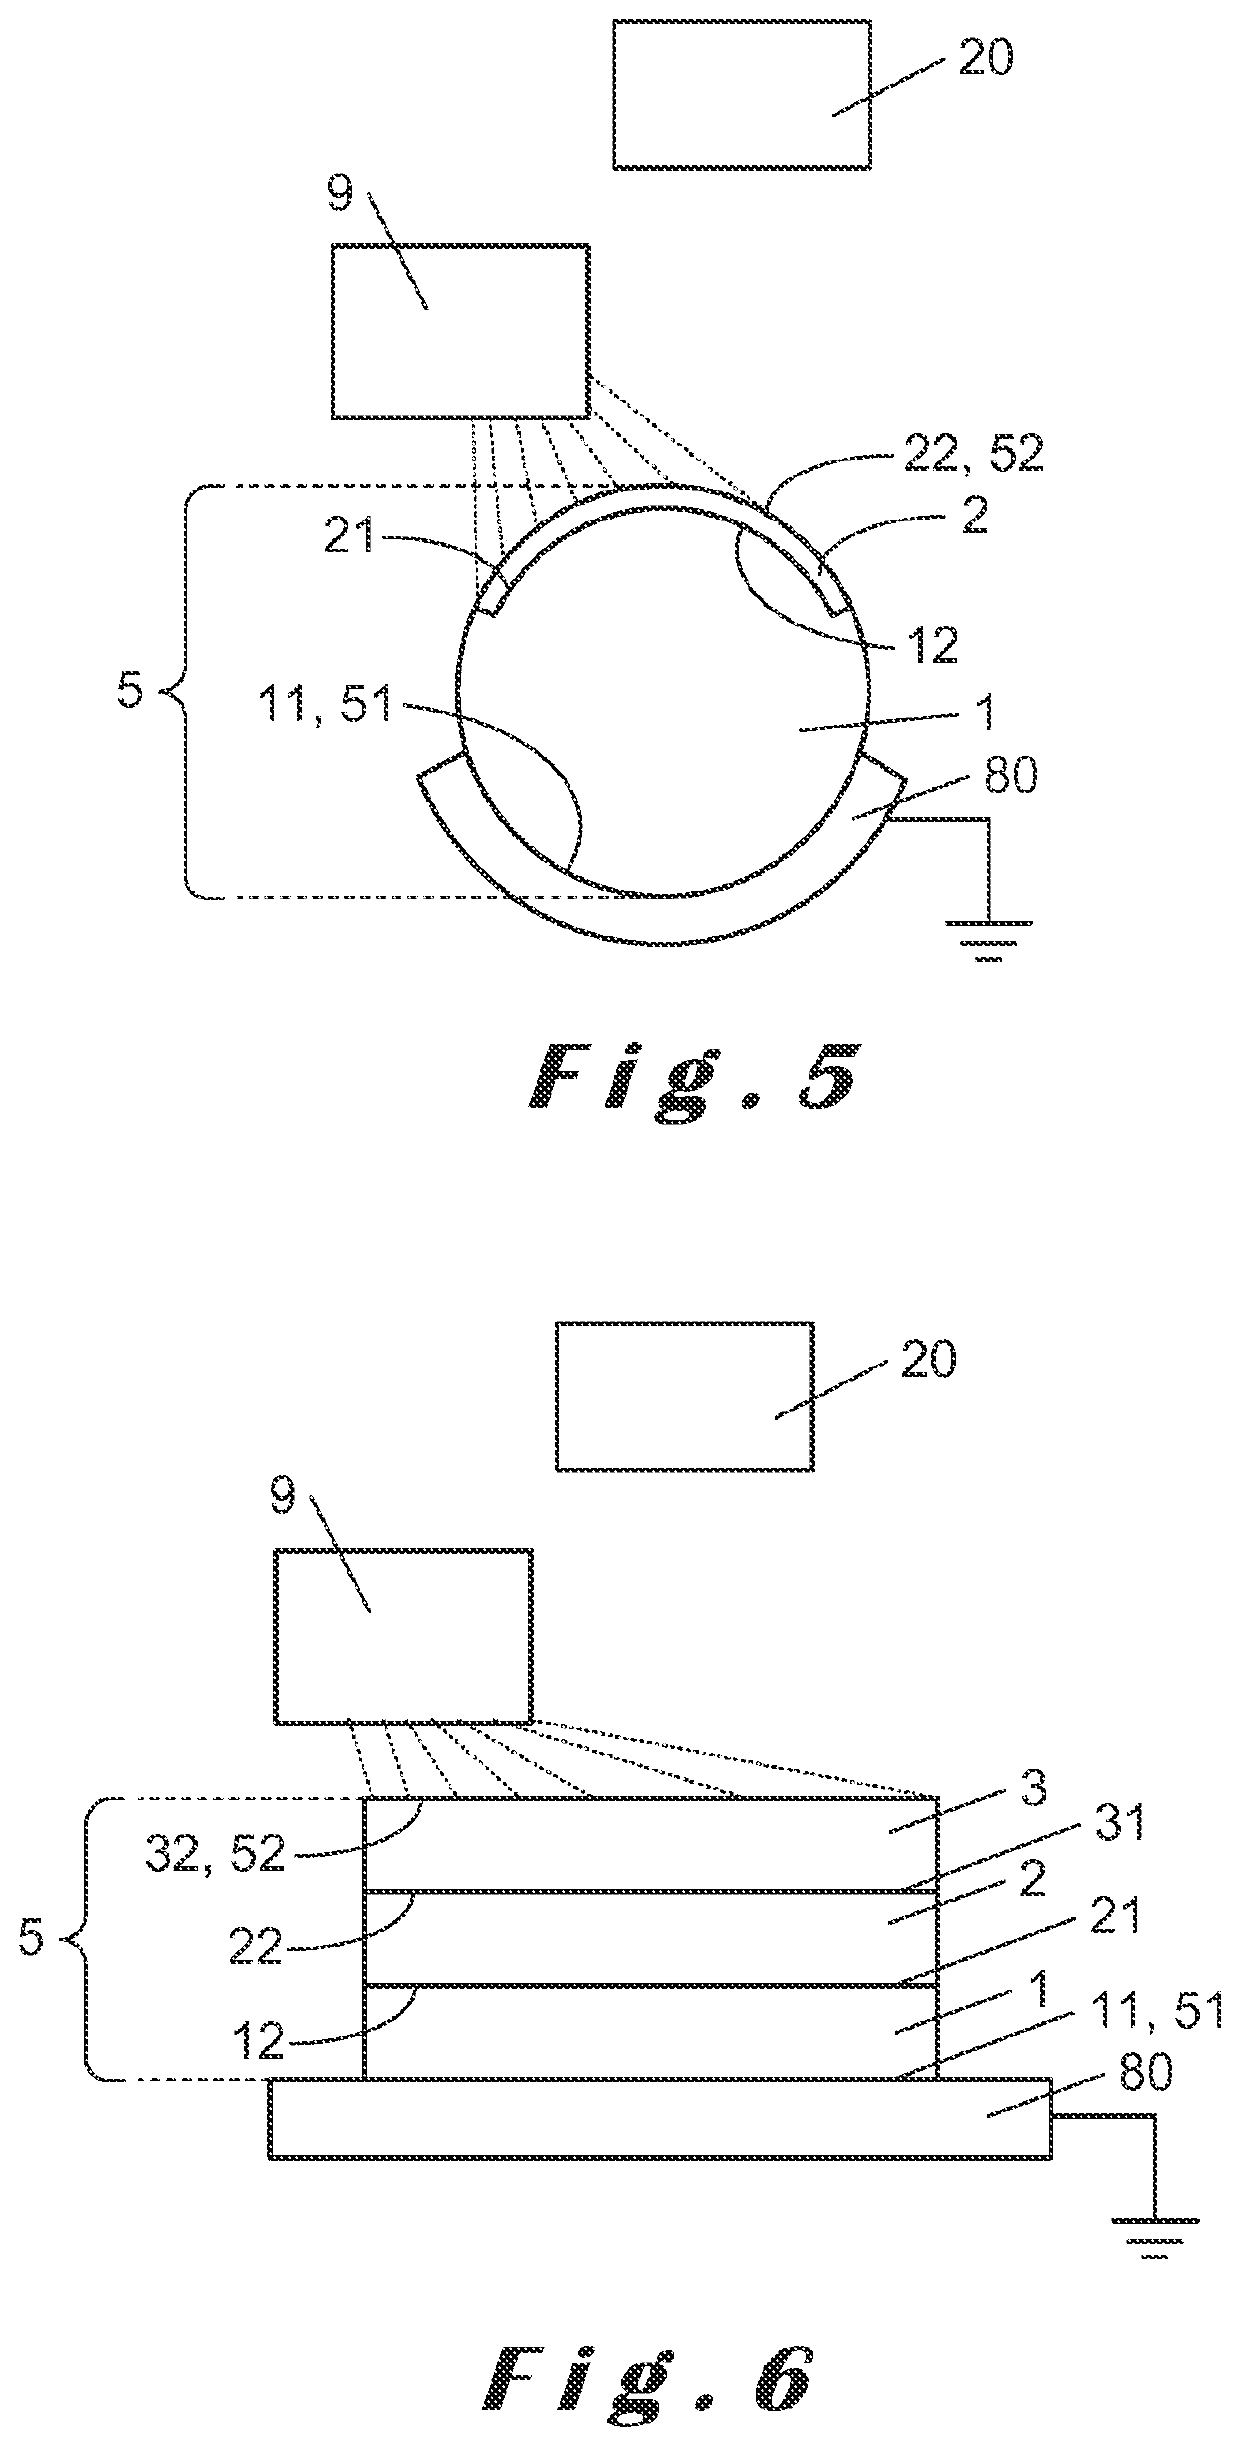 System and method for holding a workpiece in position for laser machining and/or welding thereof